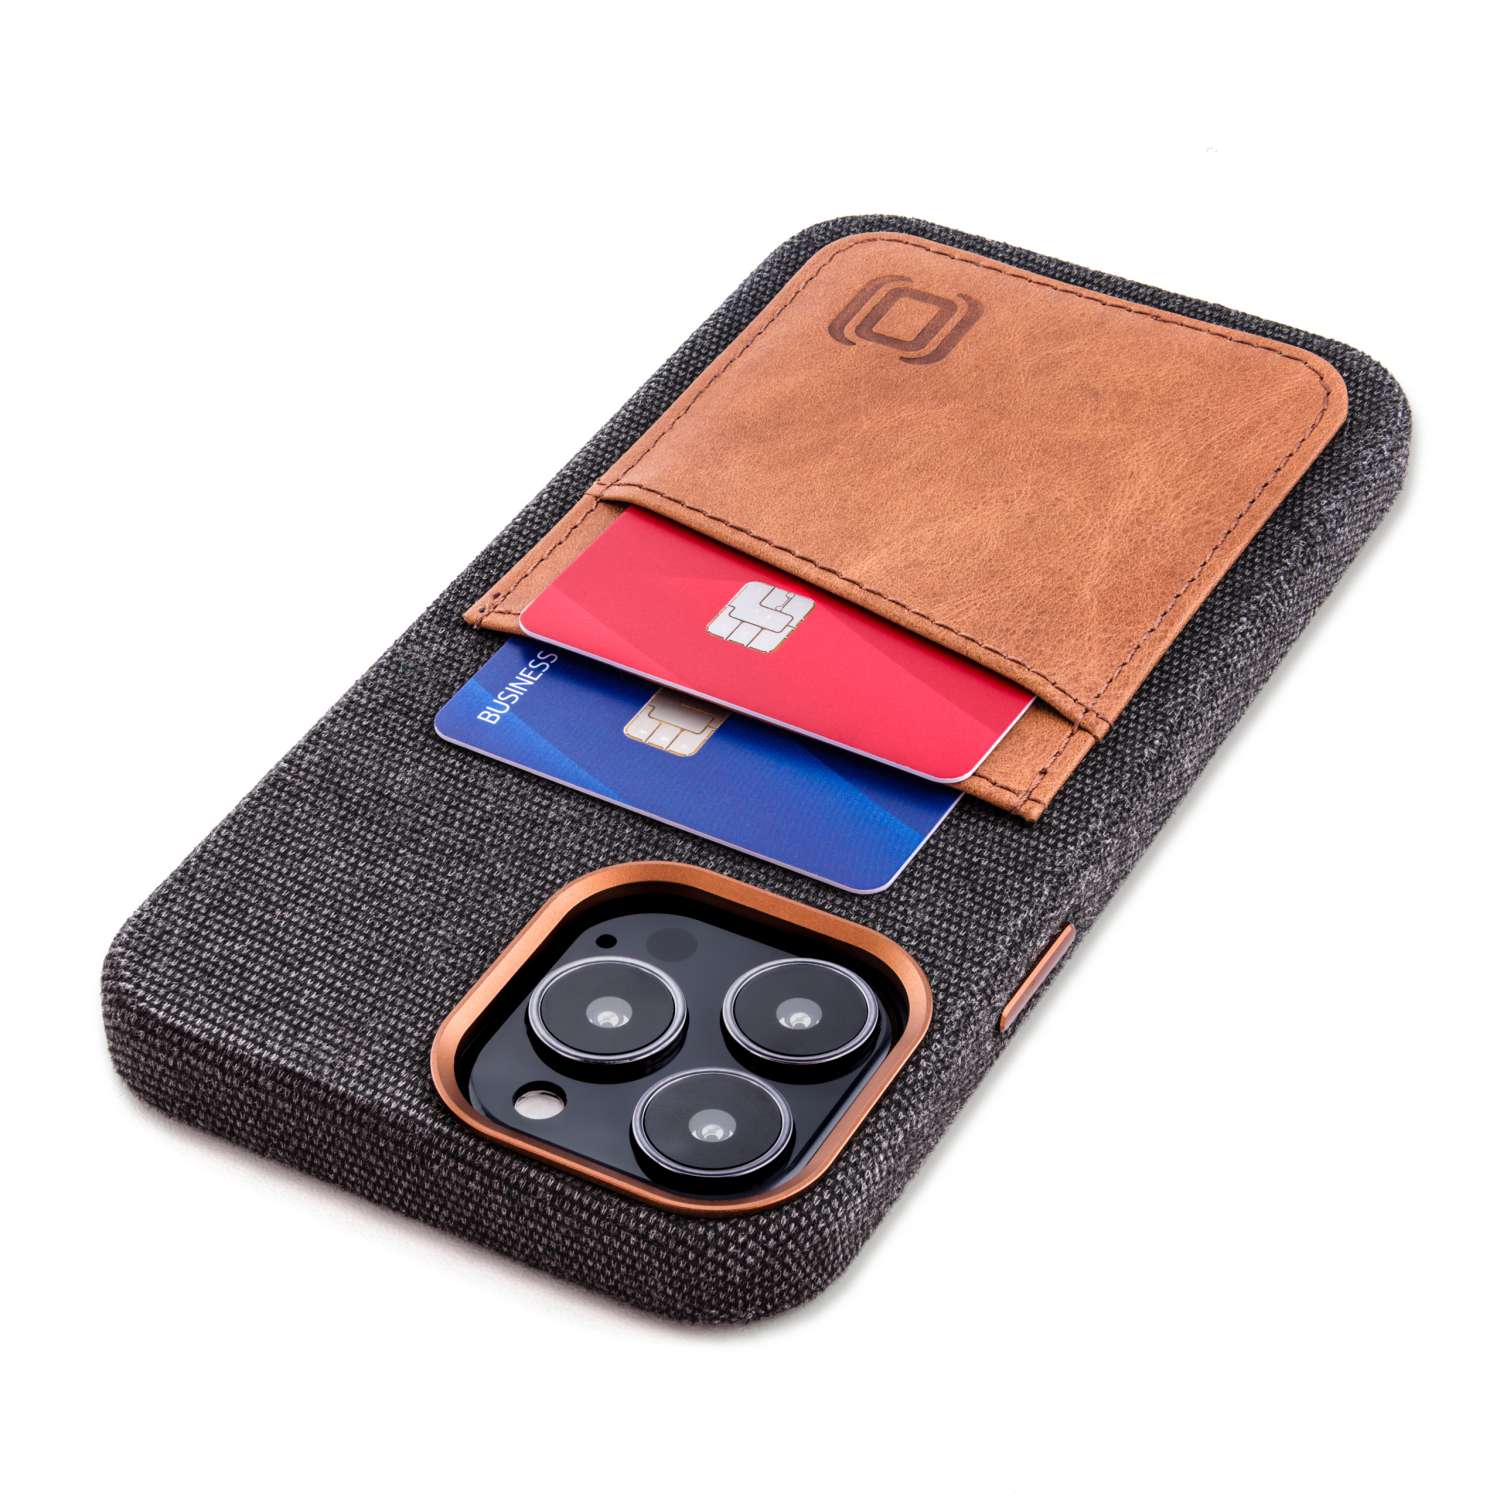 Dockem Fabric Wallet Case for The iPhone 13 Pro Max (M2F)